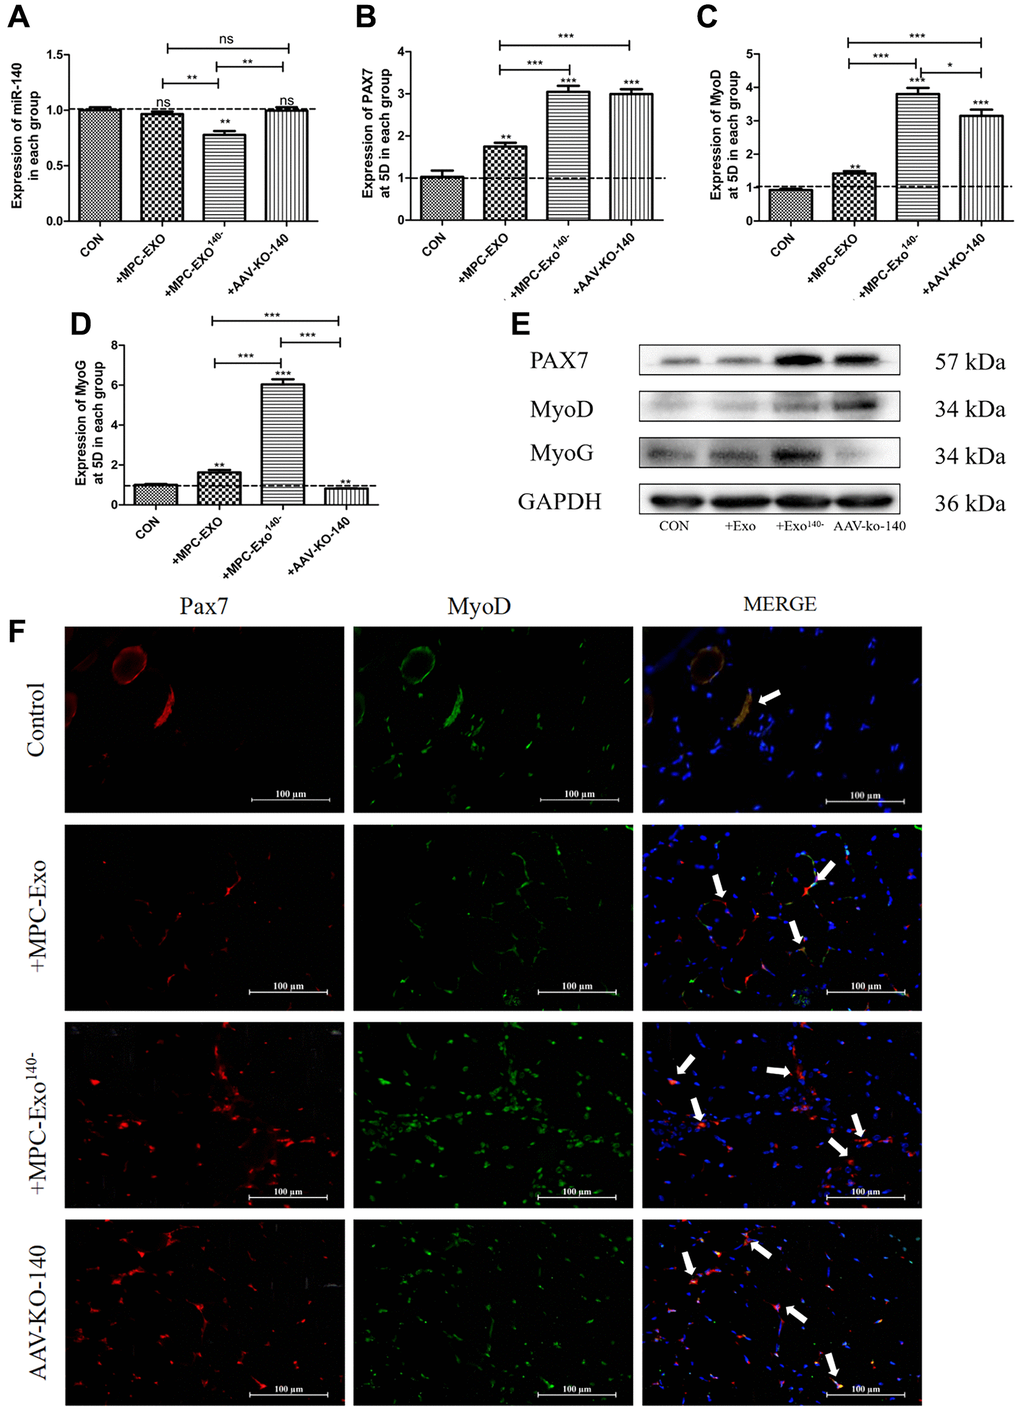 Muscle satellite cells in the gastrocnemius muscle activate by MPC-Exo, MPC-Exo140- or AAV-KO-140. Eight-week-old male wildtype C57BL/6 mice were treated with MPC-Exo and MPC-Exo140− 3 times. Five-week-old mice were injected with adeno-associated virus carrying miR-140-5p inhibitors. RT-qPCR was used to detect the expression (fold change) of miR-140-5p (A), Pax7 (B), MyoD (C) and MyoG (D). The amount of proteins for Pax 7, MyoD and myoD was analyzed by Western blot (E). Data: mean ± SEM (N = 5). *P F) presents the IF results: activated SCs are characterized by the coexpression of Pax7+/MyoD+. The marked locations in the figure indicate that in the control group, these cells are expressed only in the cell pool to maintain stem cell numbers. In the injected MPC-Exo group, there was a significant increase in activated SCs around the muscle fibers, indicating that muscle satellite cells were in a proliferative state. This proliferation of activated SCs was further augmented in the injected MPC-Exo140− group and AAV-KO-140 group (Scale bar in 100 μm).